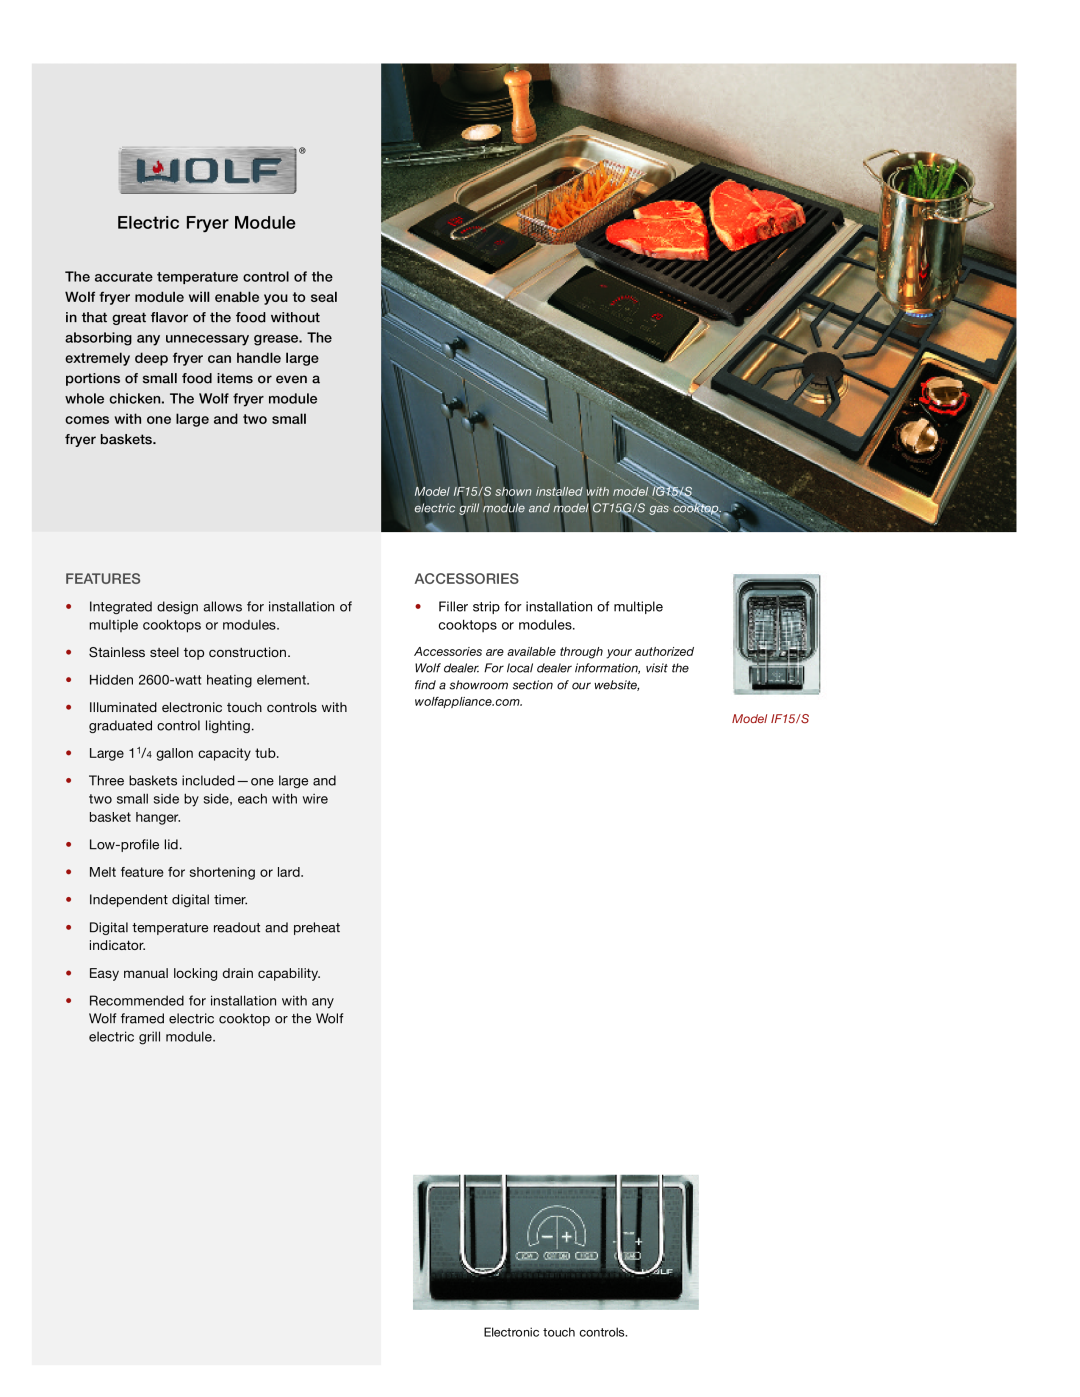 Wolf Appliance Company IF15/S manual Electric Fryer Module, Features, Accessories 